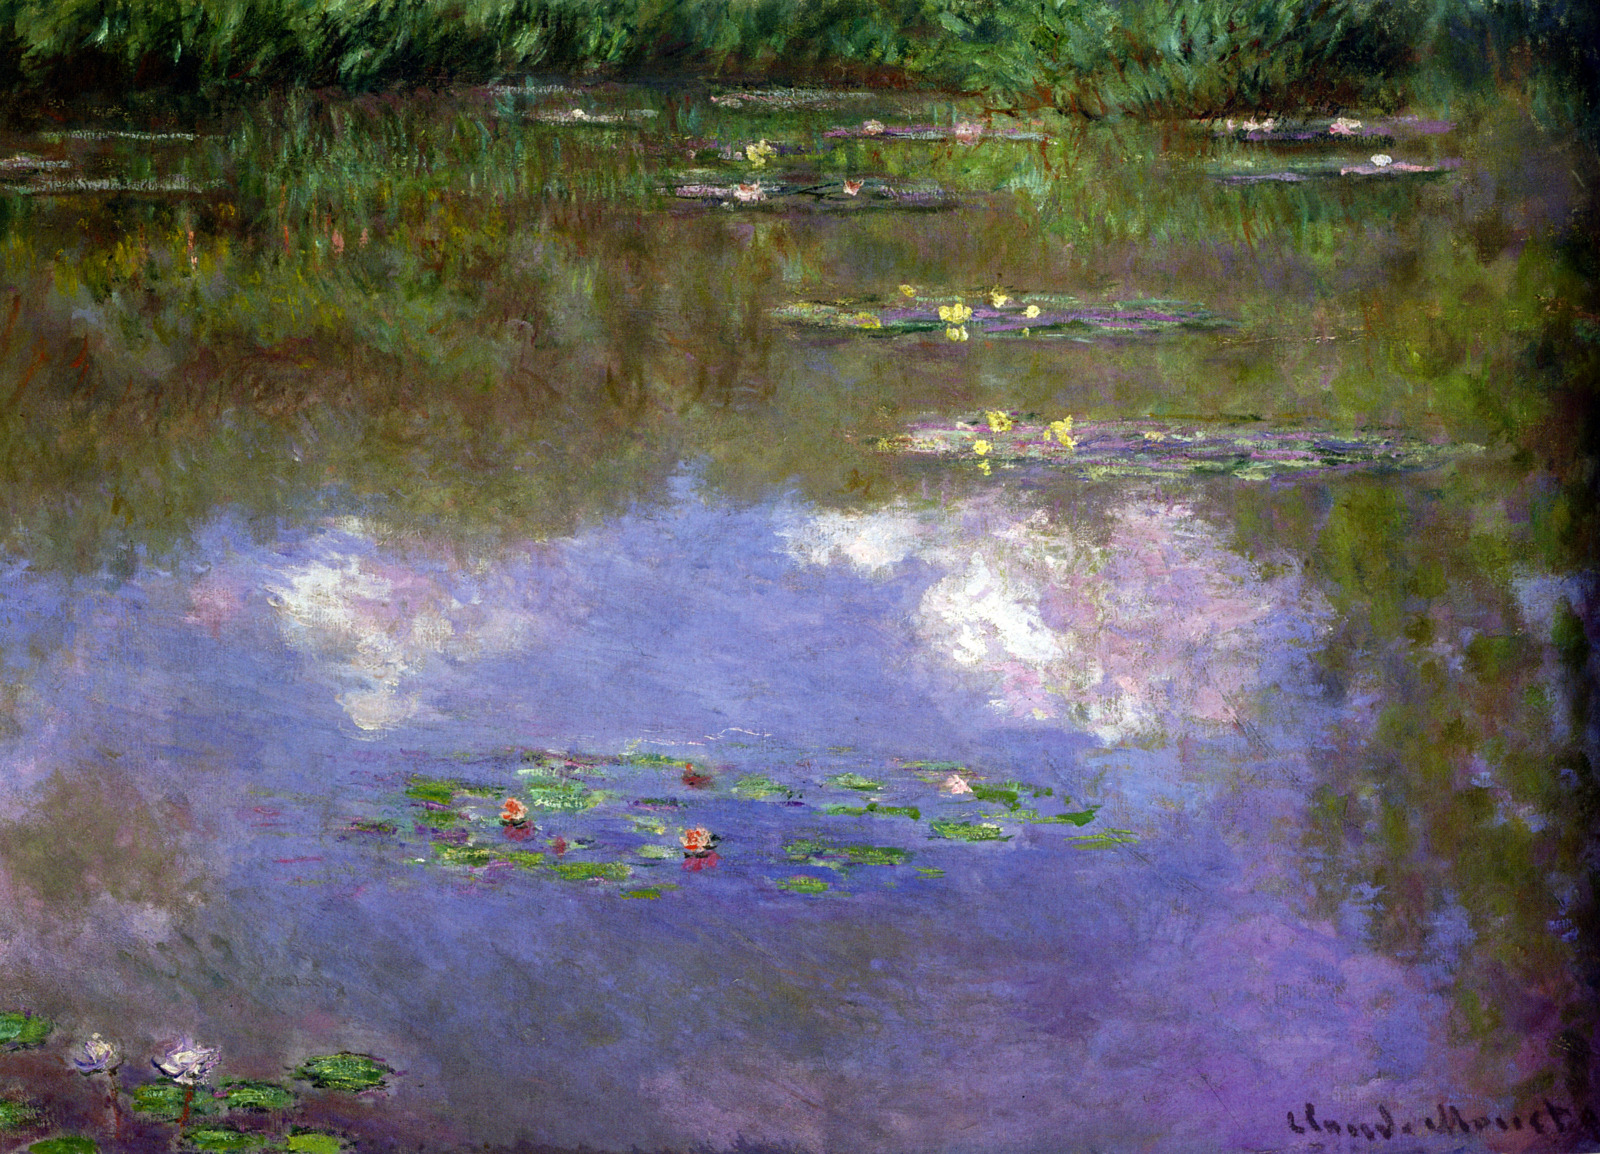 Water Lilies, The Clouds by Claude Monet - 1903 - 74.6 x 105.3 cm private collection